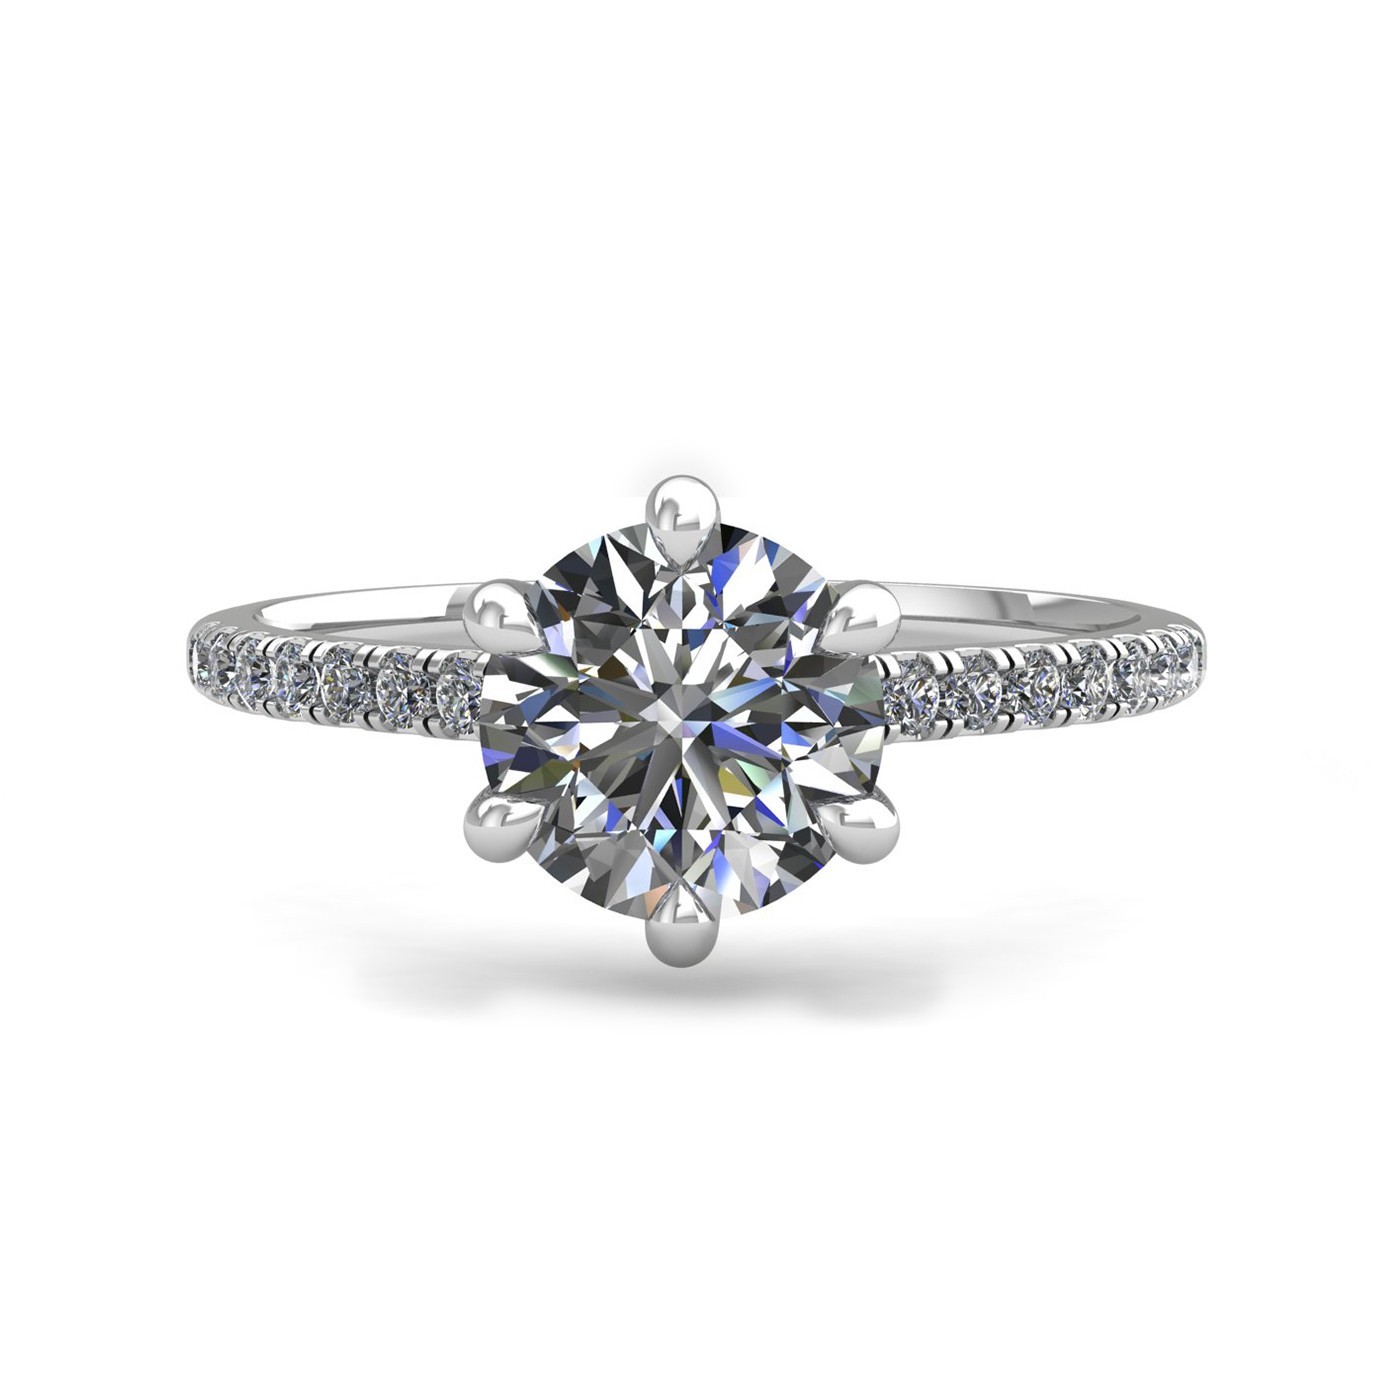 18k white gold 2,00 ct 6 prongs round cut diamond engagement ring with whisper thin pavÉ set band Photos & images